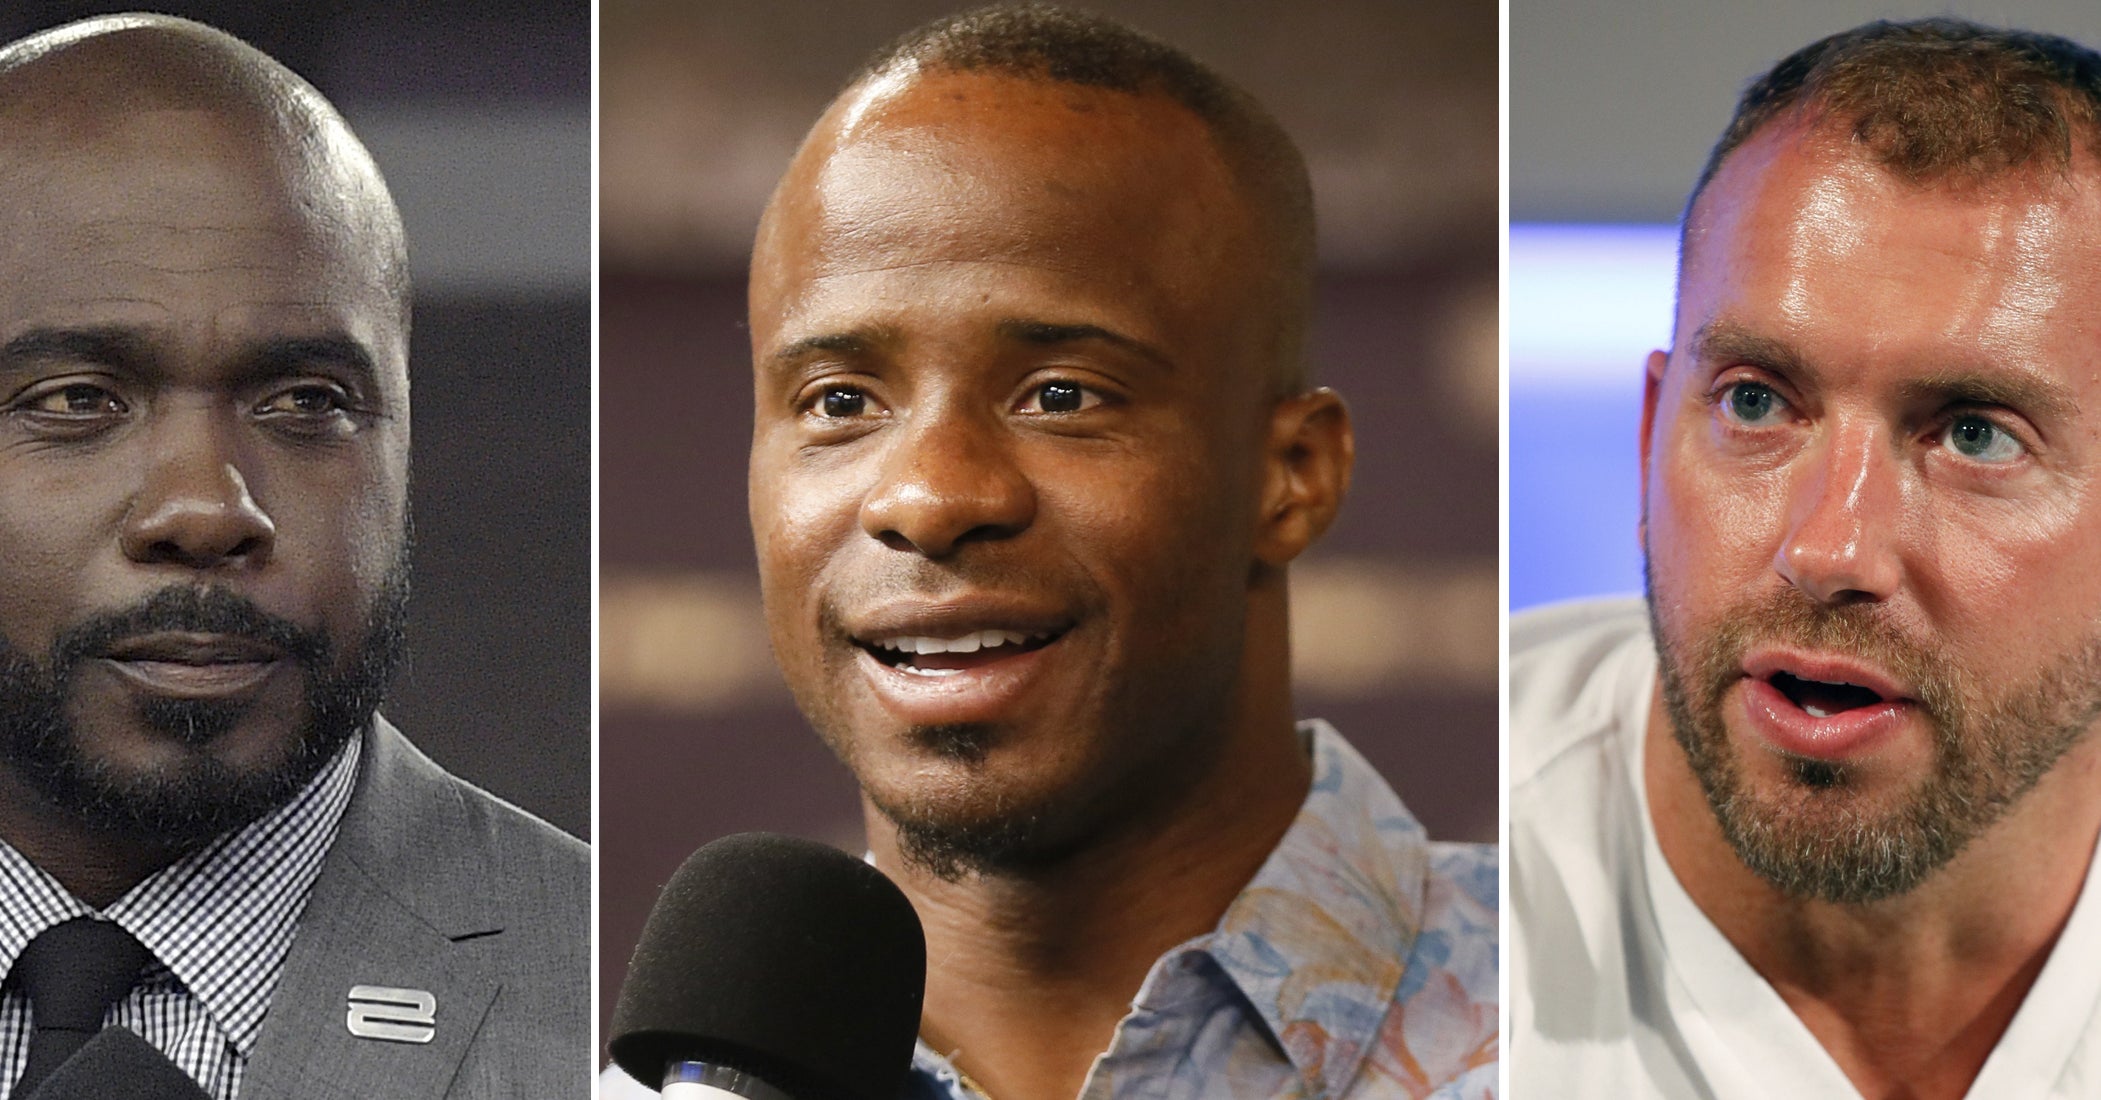 Five Former NFL Players Have Been Suspended From Commentator Jobs After